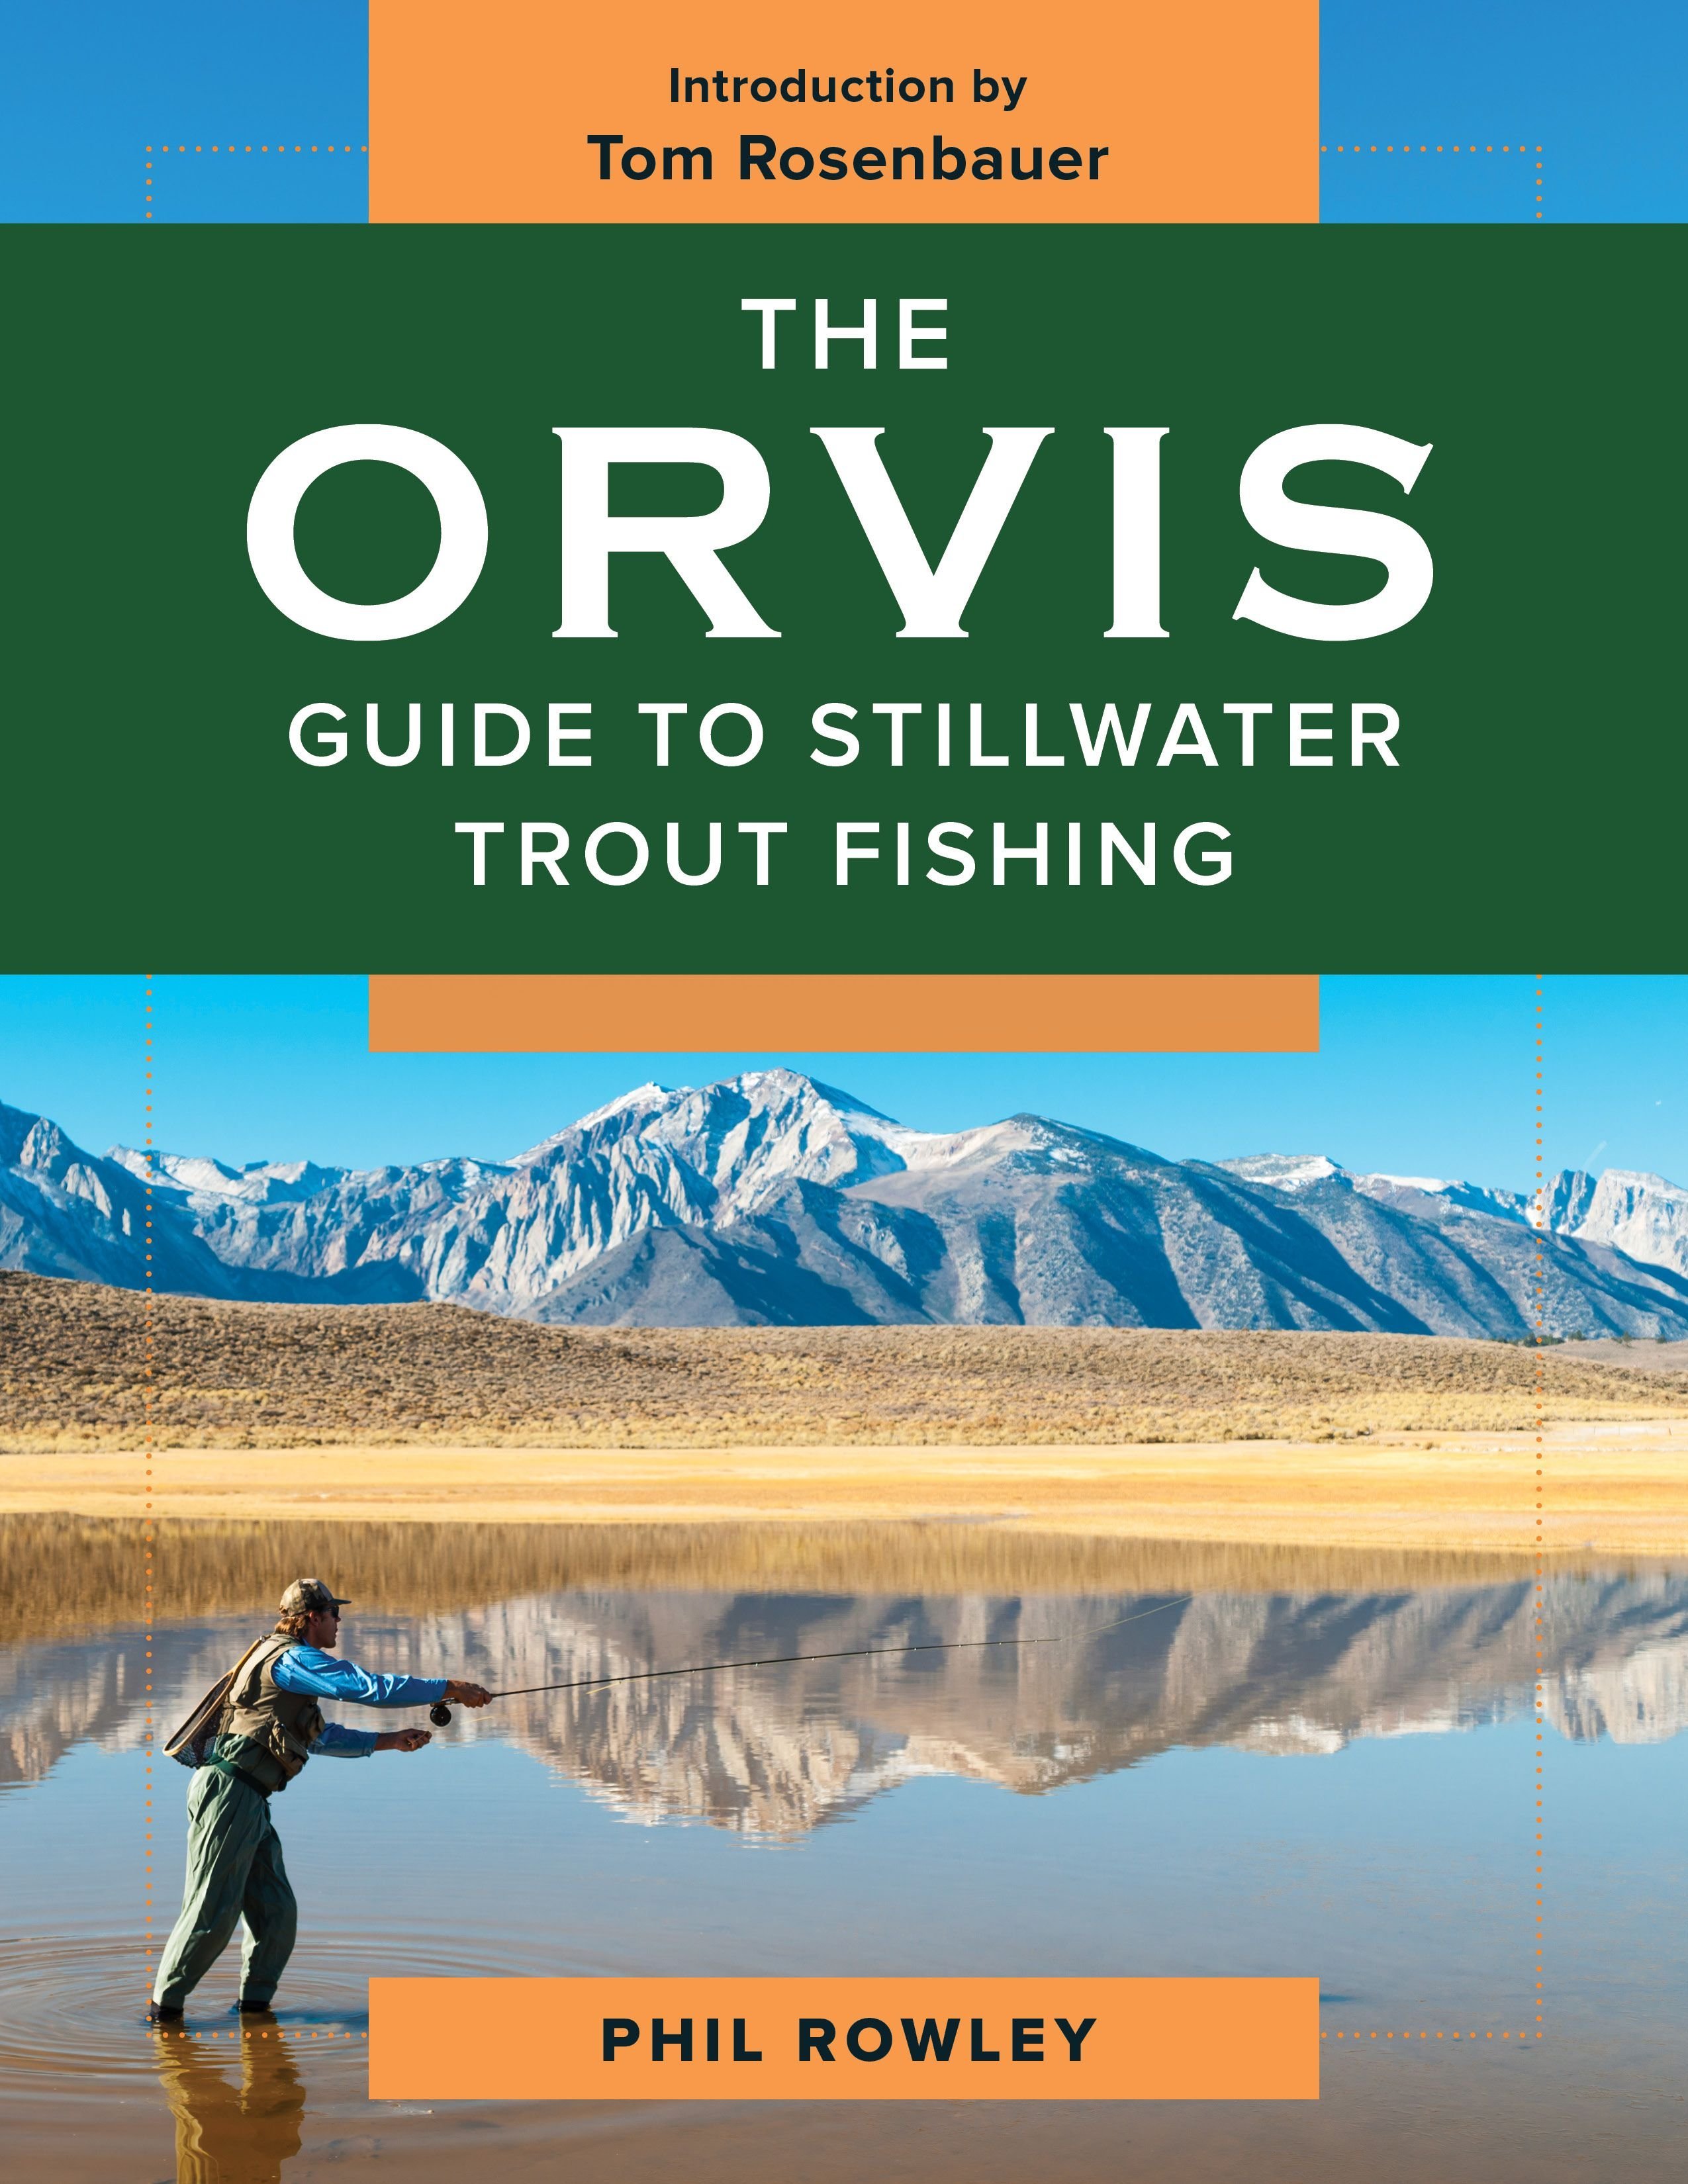 The Orvis Guide to Saltwater Fly Fishing book by Nick Curcione